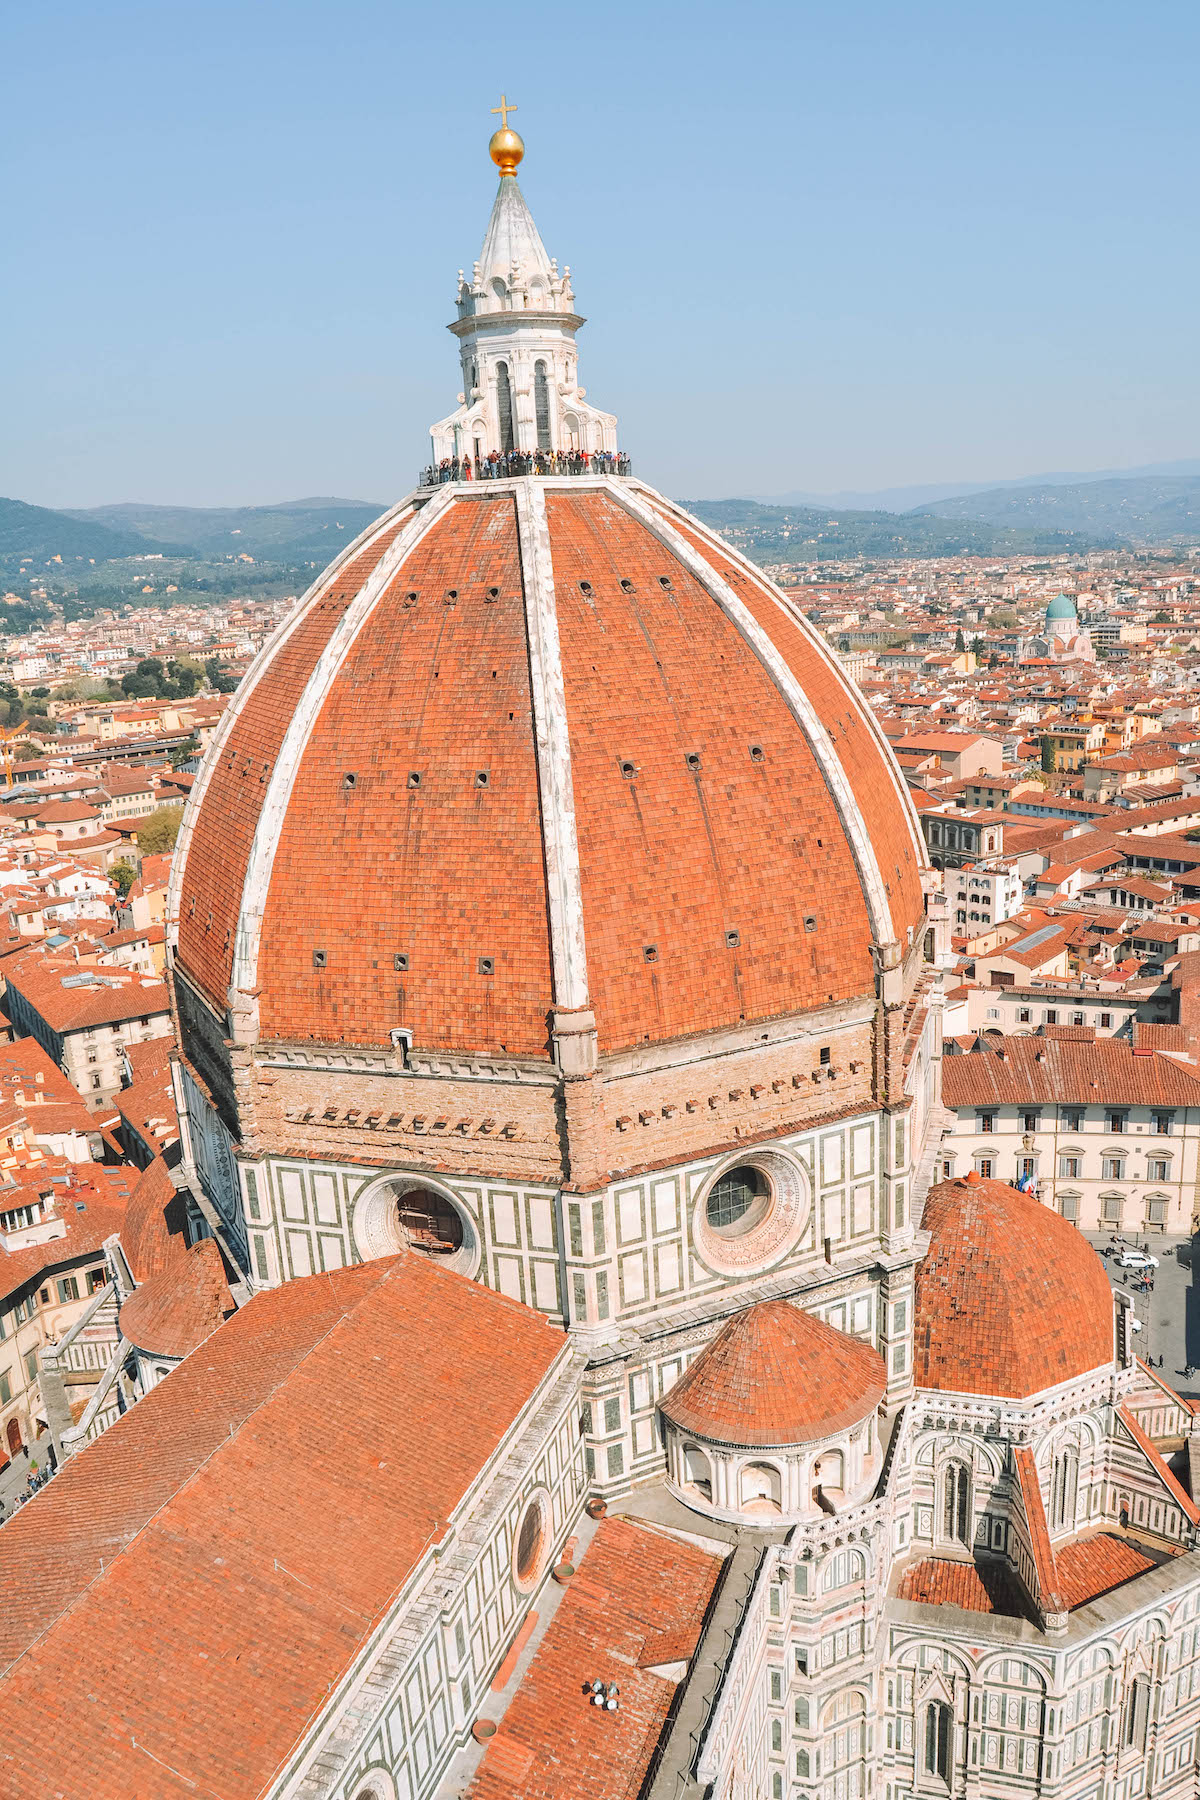 View from the bell tower of the Florence Duomo.